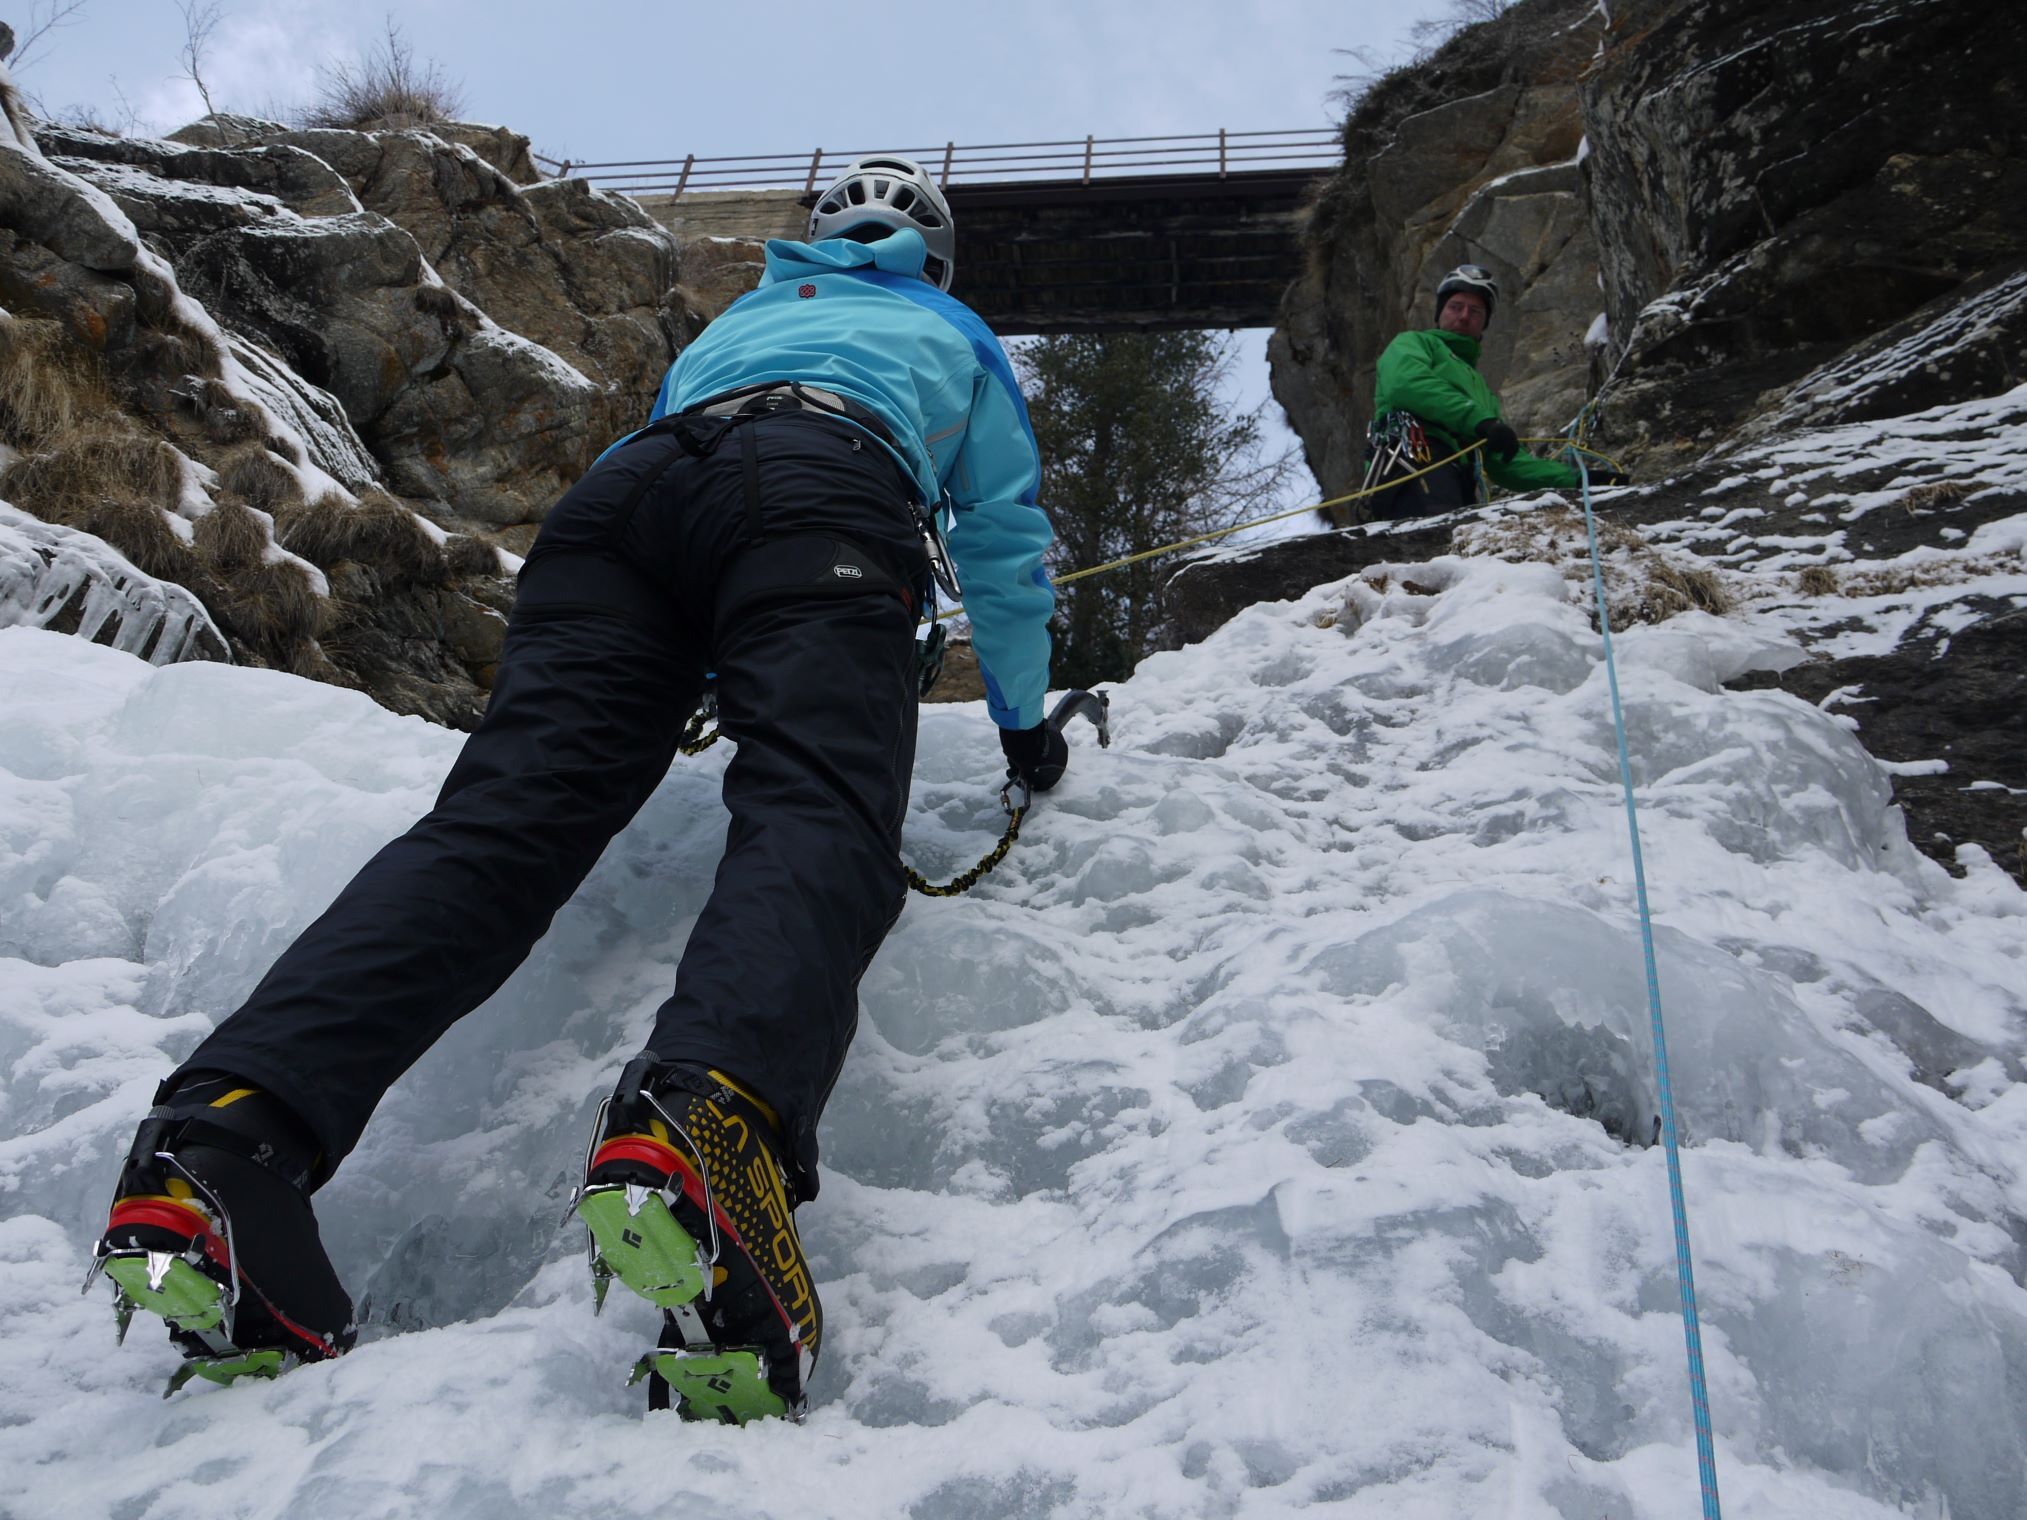 Ice climber belayed from above by guide